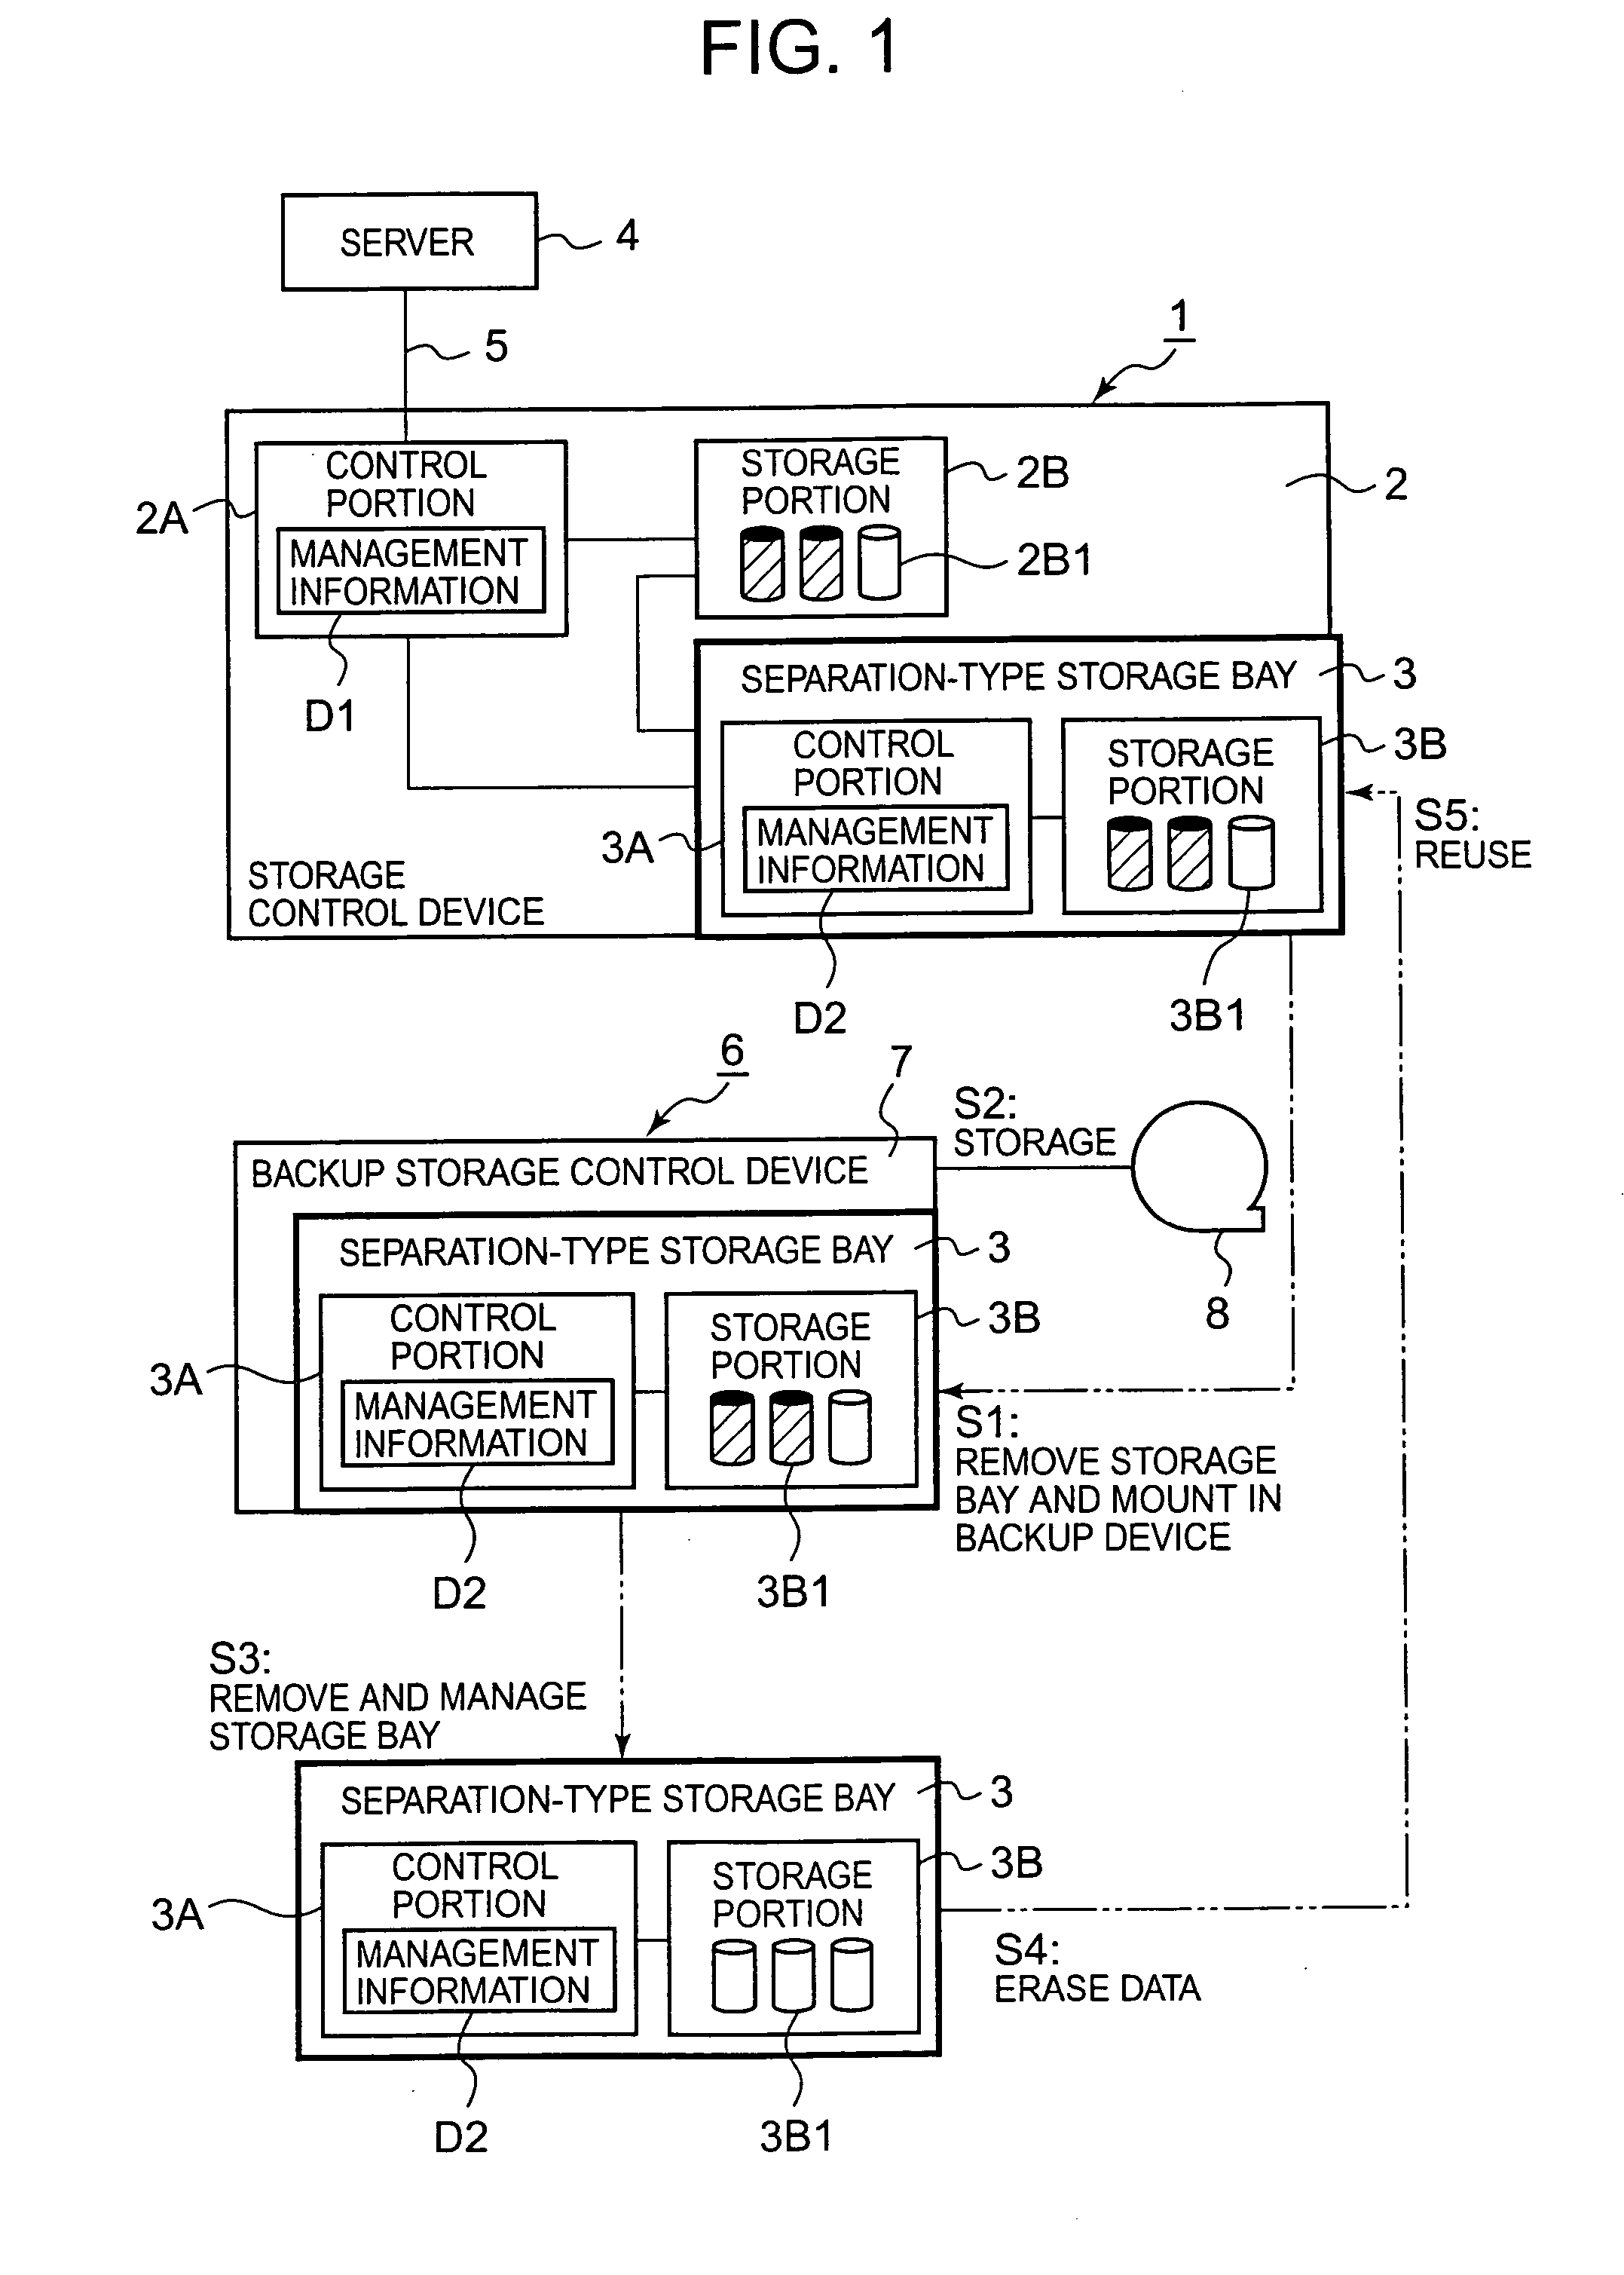 Storage control device and separation-type storage device